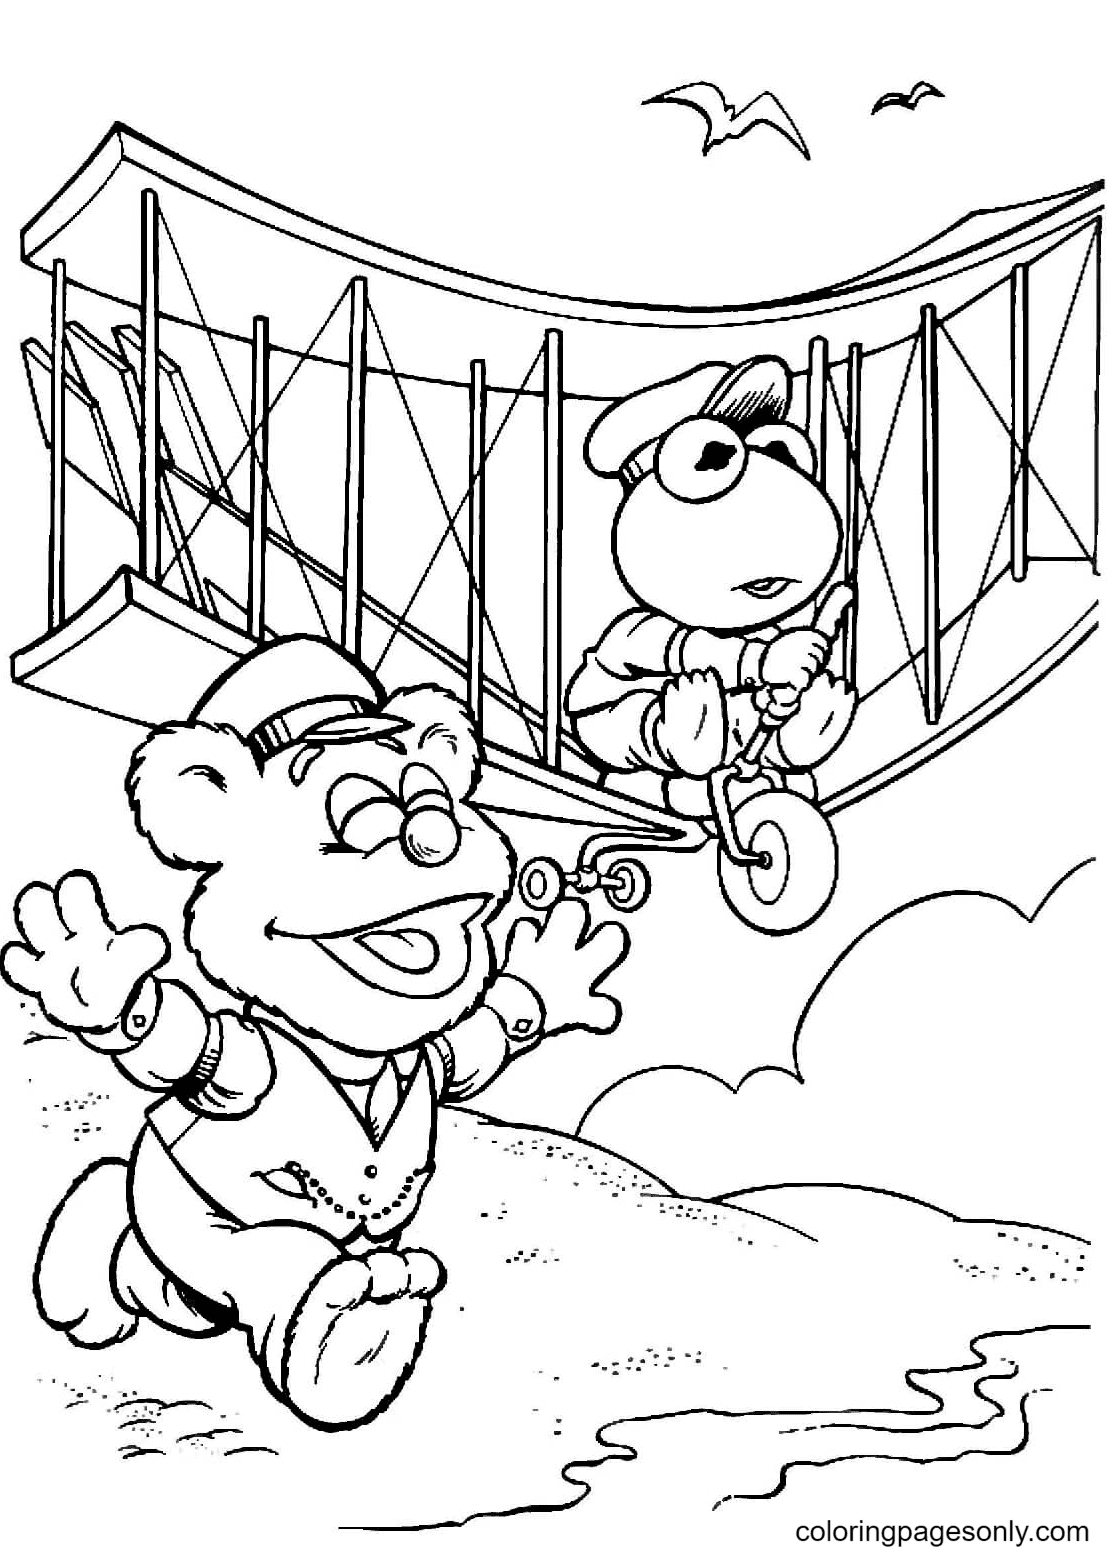 Kermit and Fozzie Coloring Page